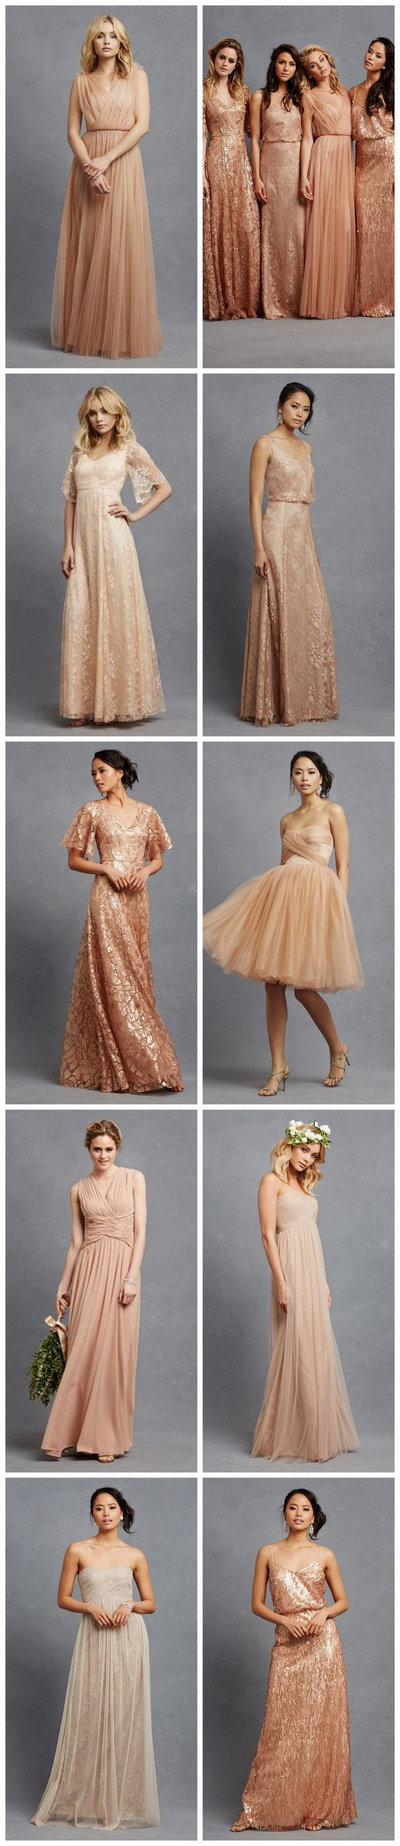 Blush bridesmaid dresses in so many gorgeous silhouettes and fabrics!